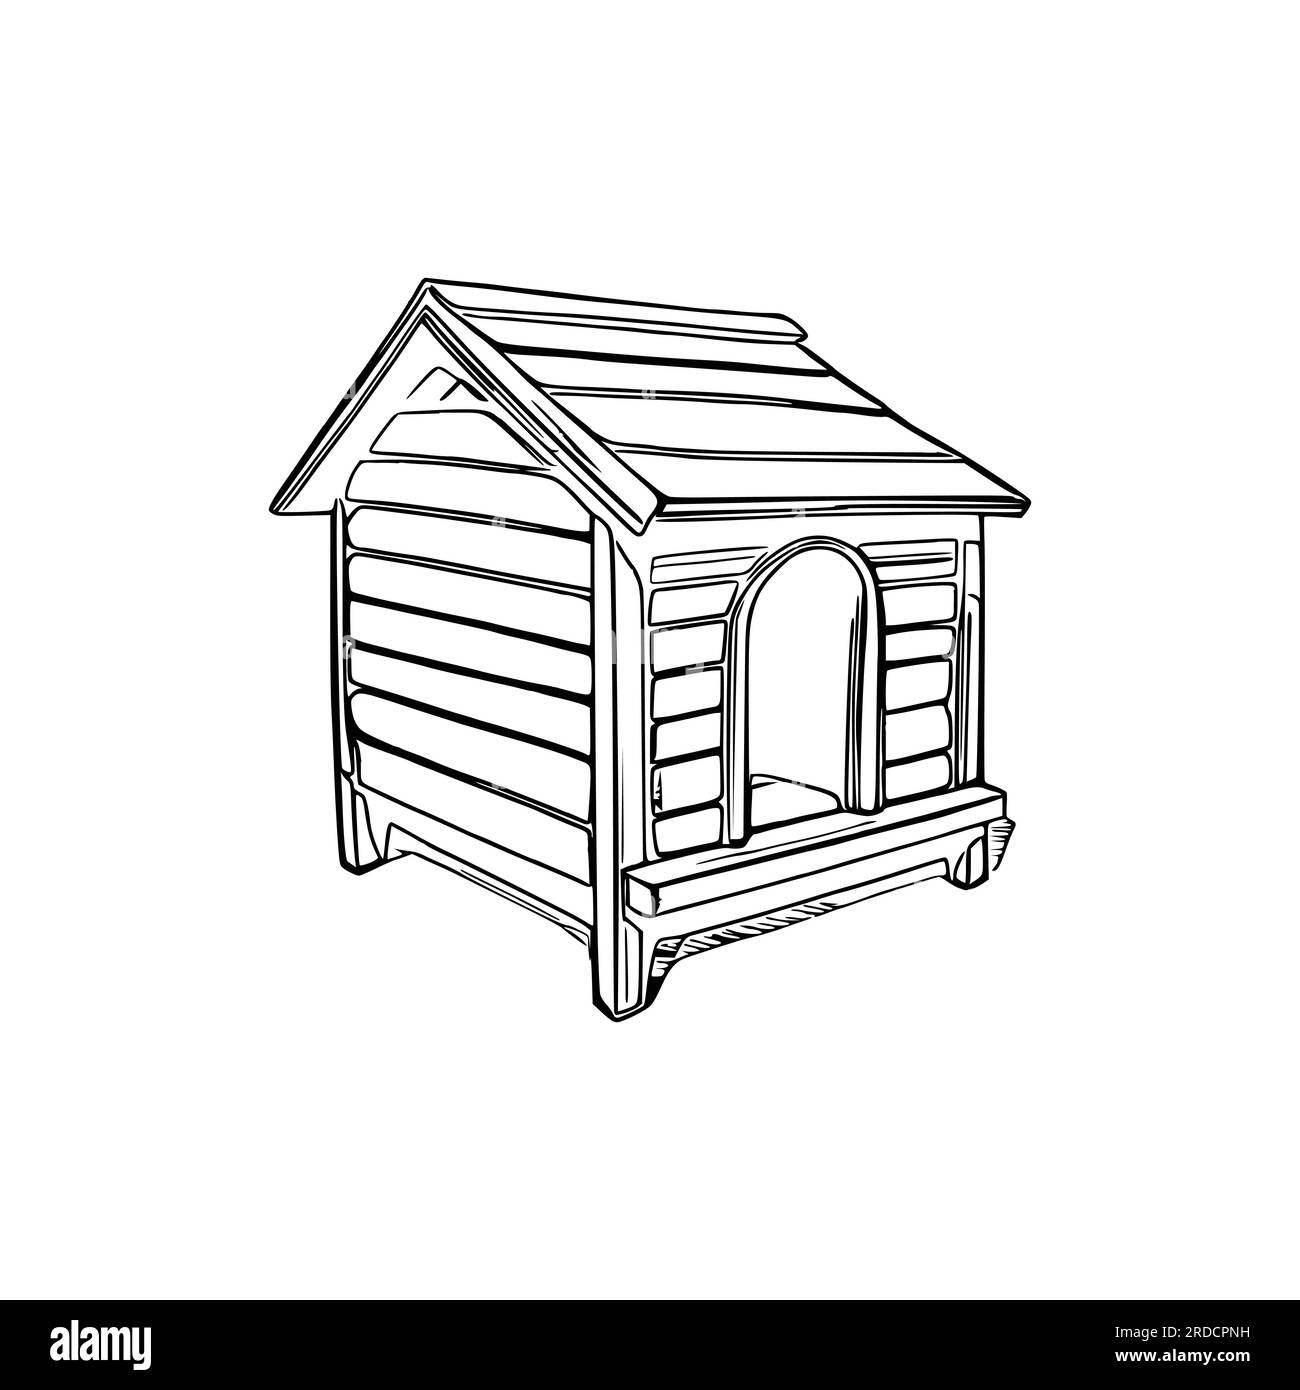 Dog house coloring book dog house coloring page black and white drawing for coloring pages vector illustration stock vector image art